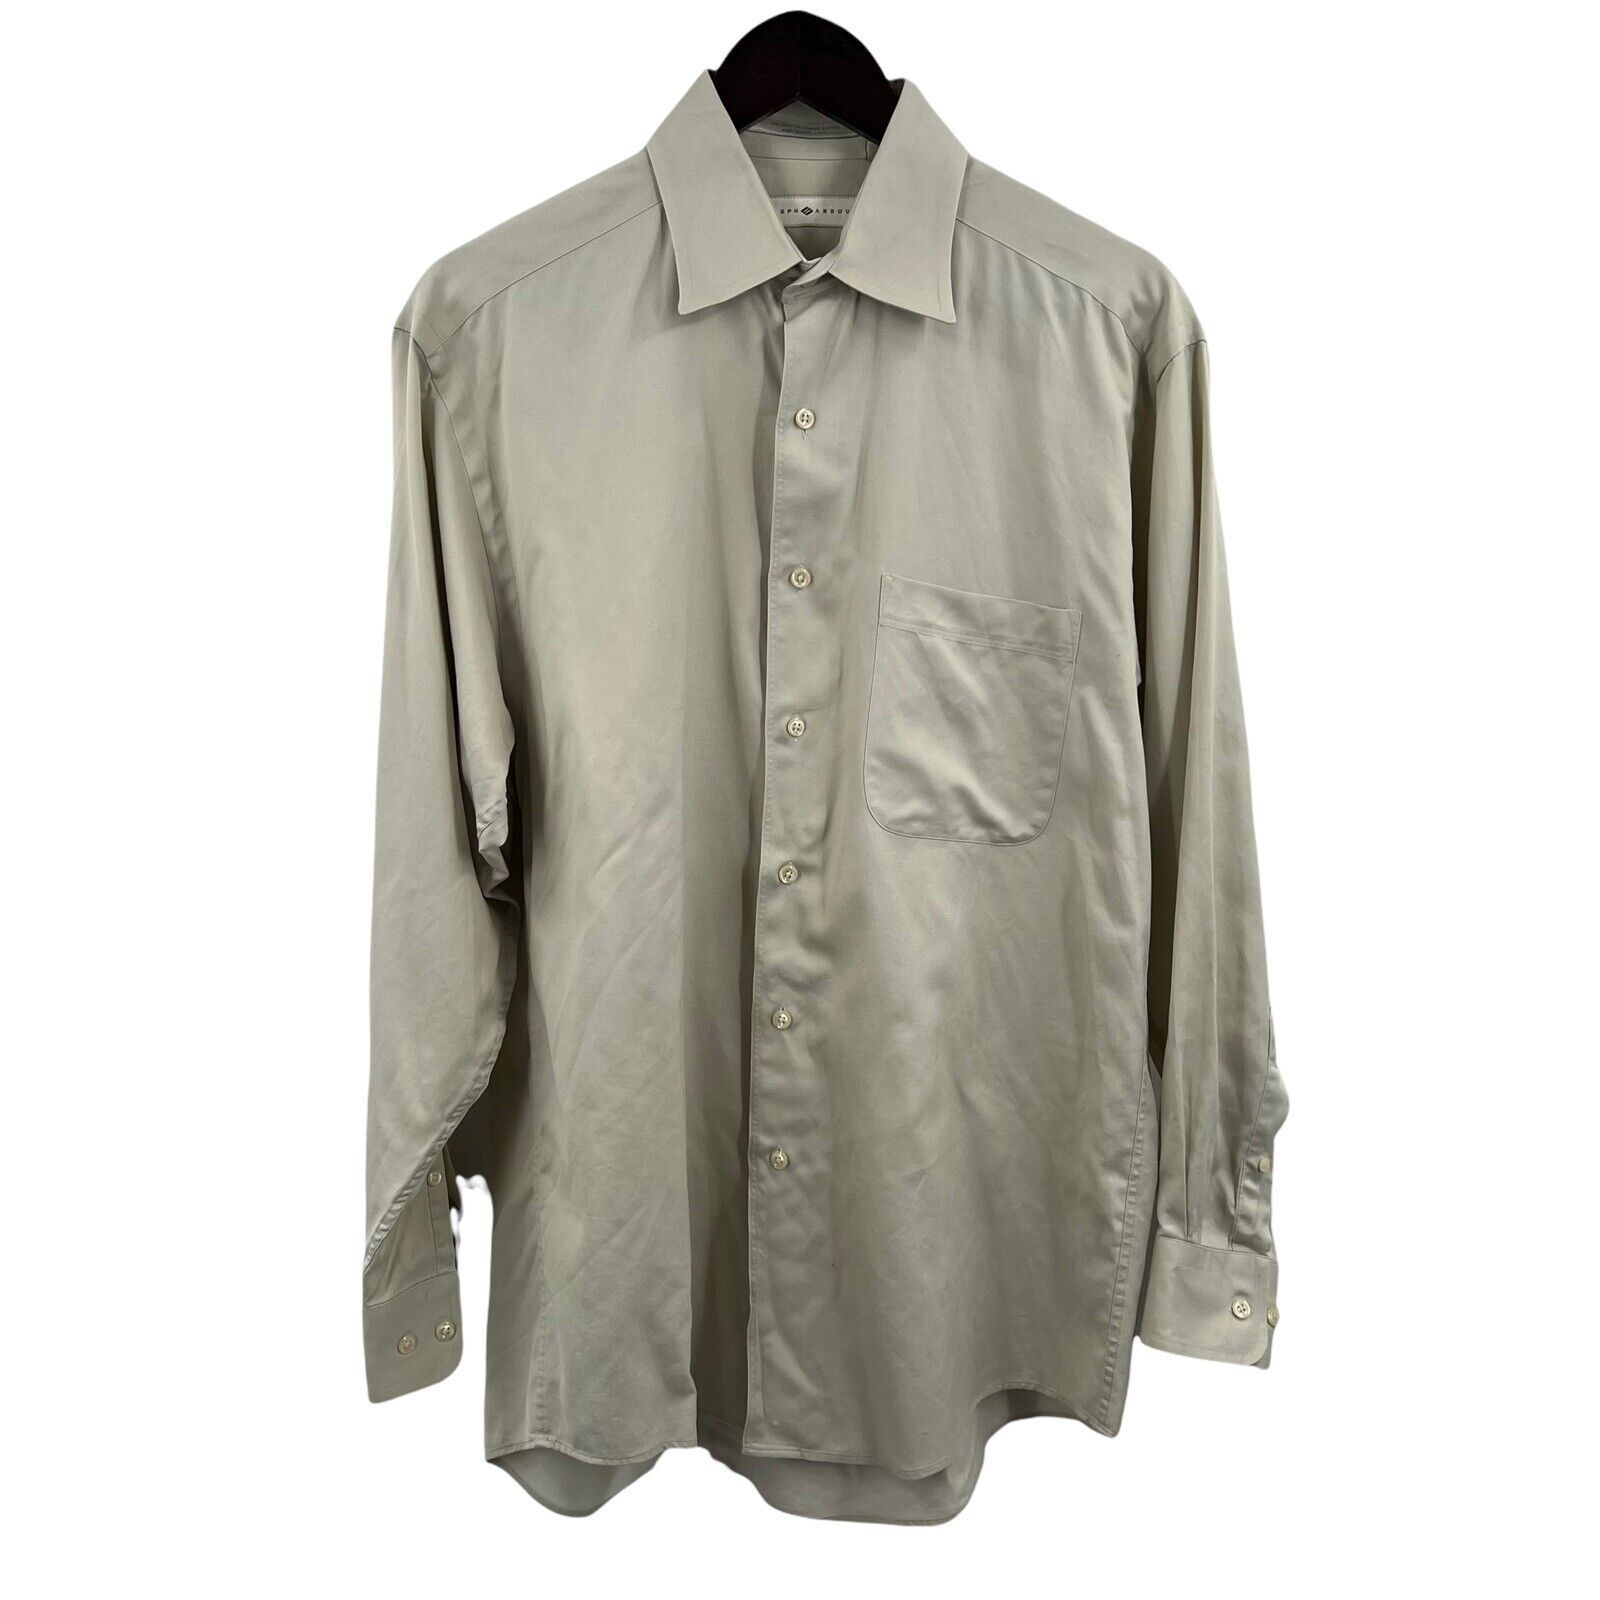 Primary image for Joseph Abboud Beige Combed Cotton Long Sleeve Button Down Shirt 15 1/2